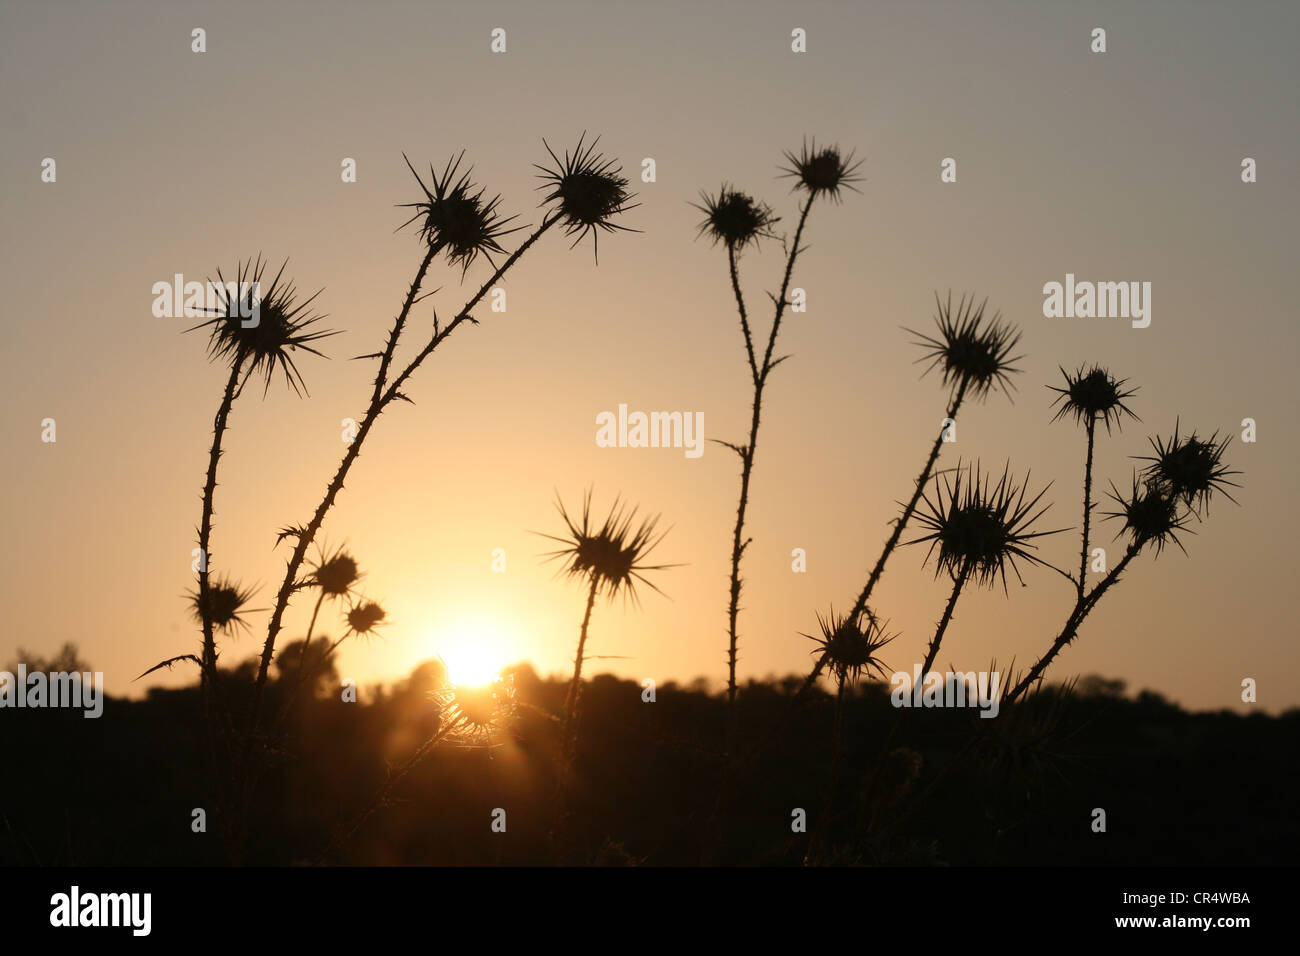 Seed pods on stalks silhouetted against a setting sun Stock Photo